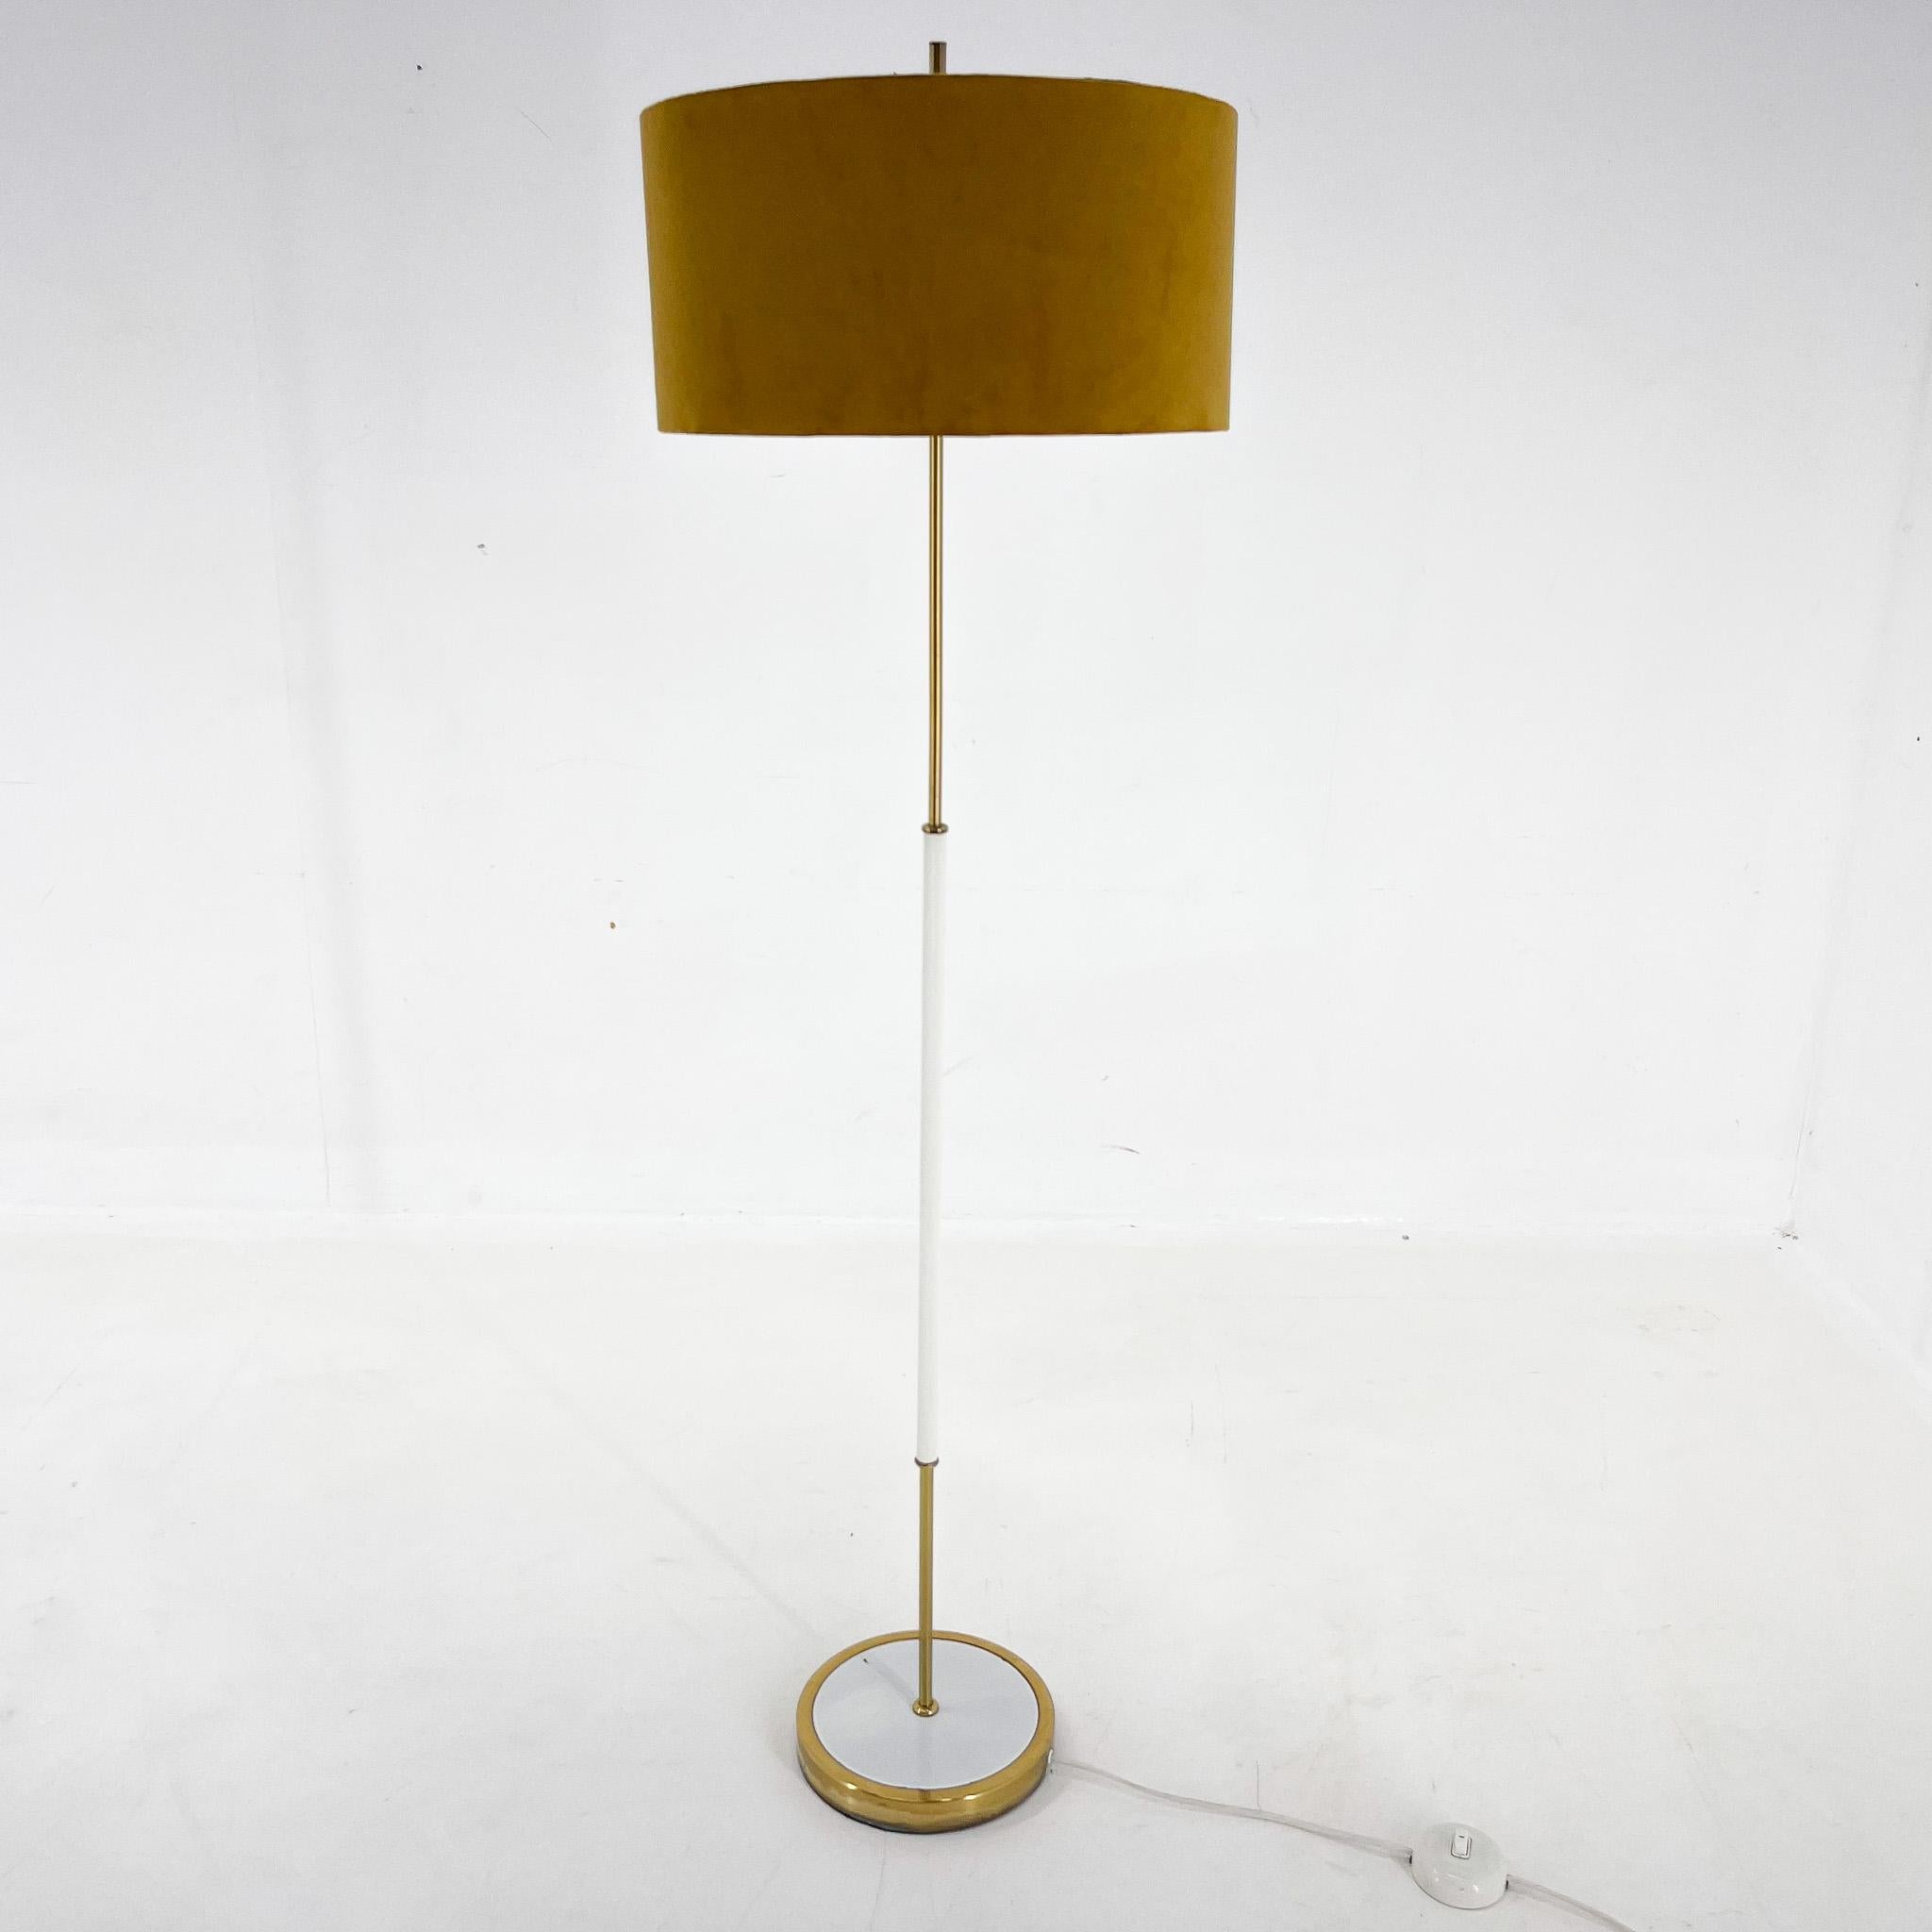 Vintage German floor lamp with original step-on switch. The lamp has new handmade lamp shade. 
Bulb: 1 x E25-E27. 
US plug adapter included.